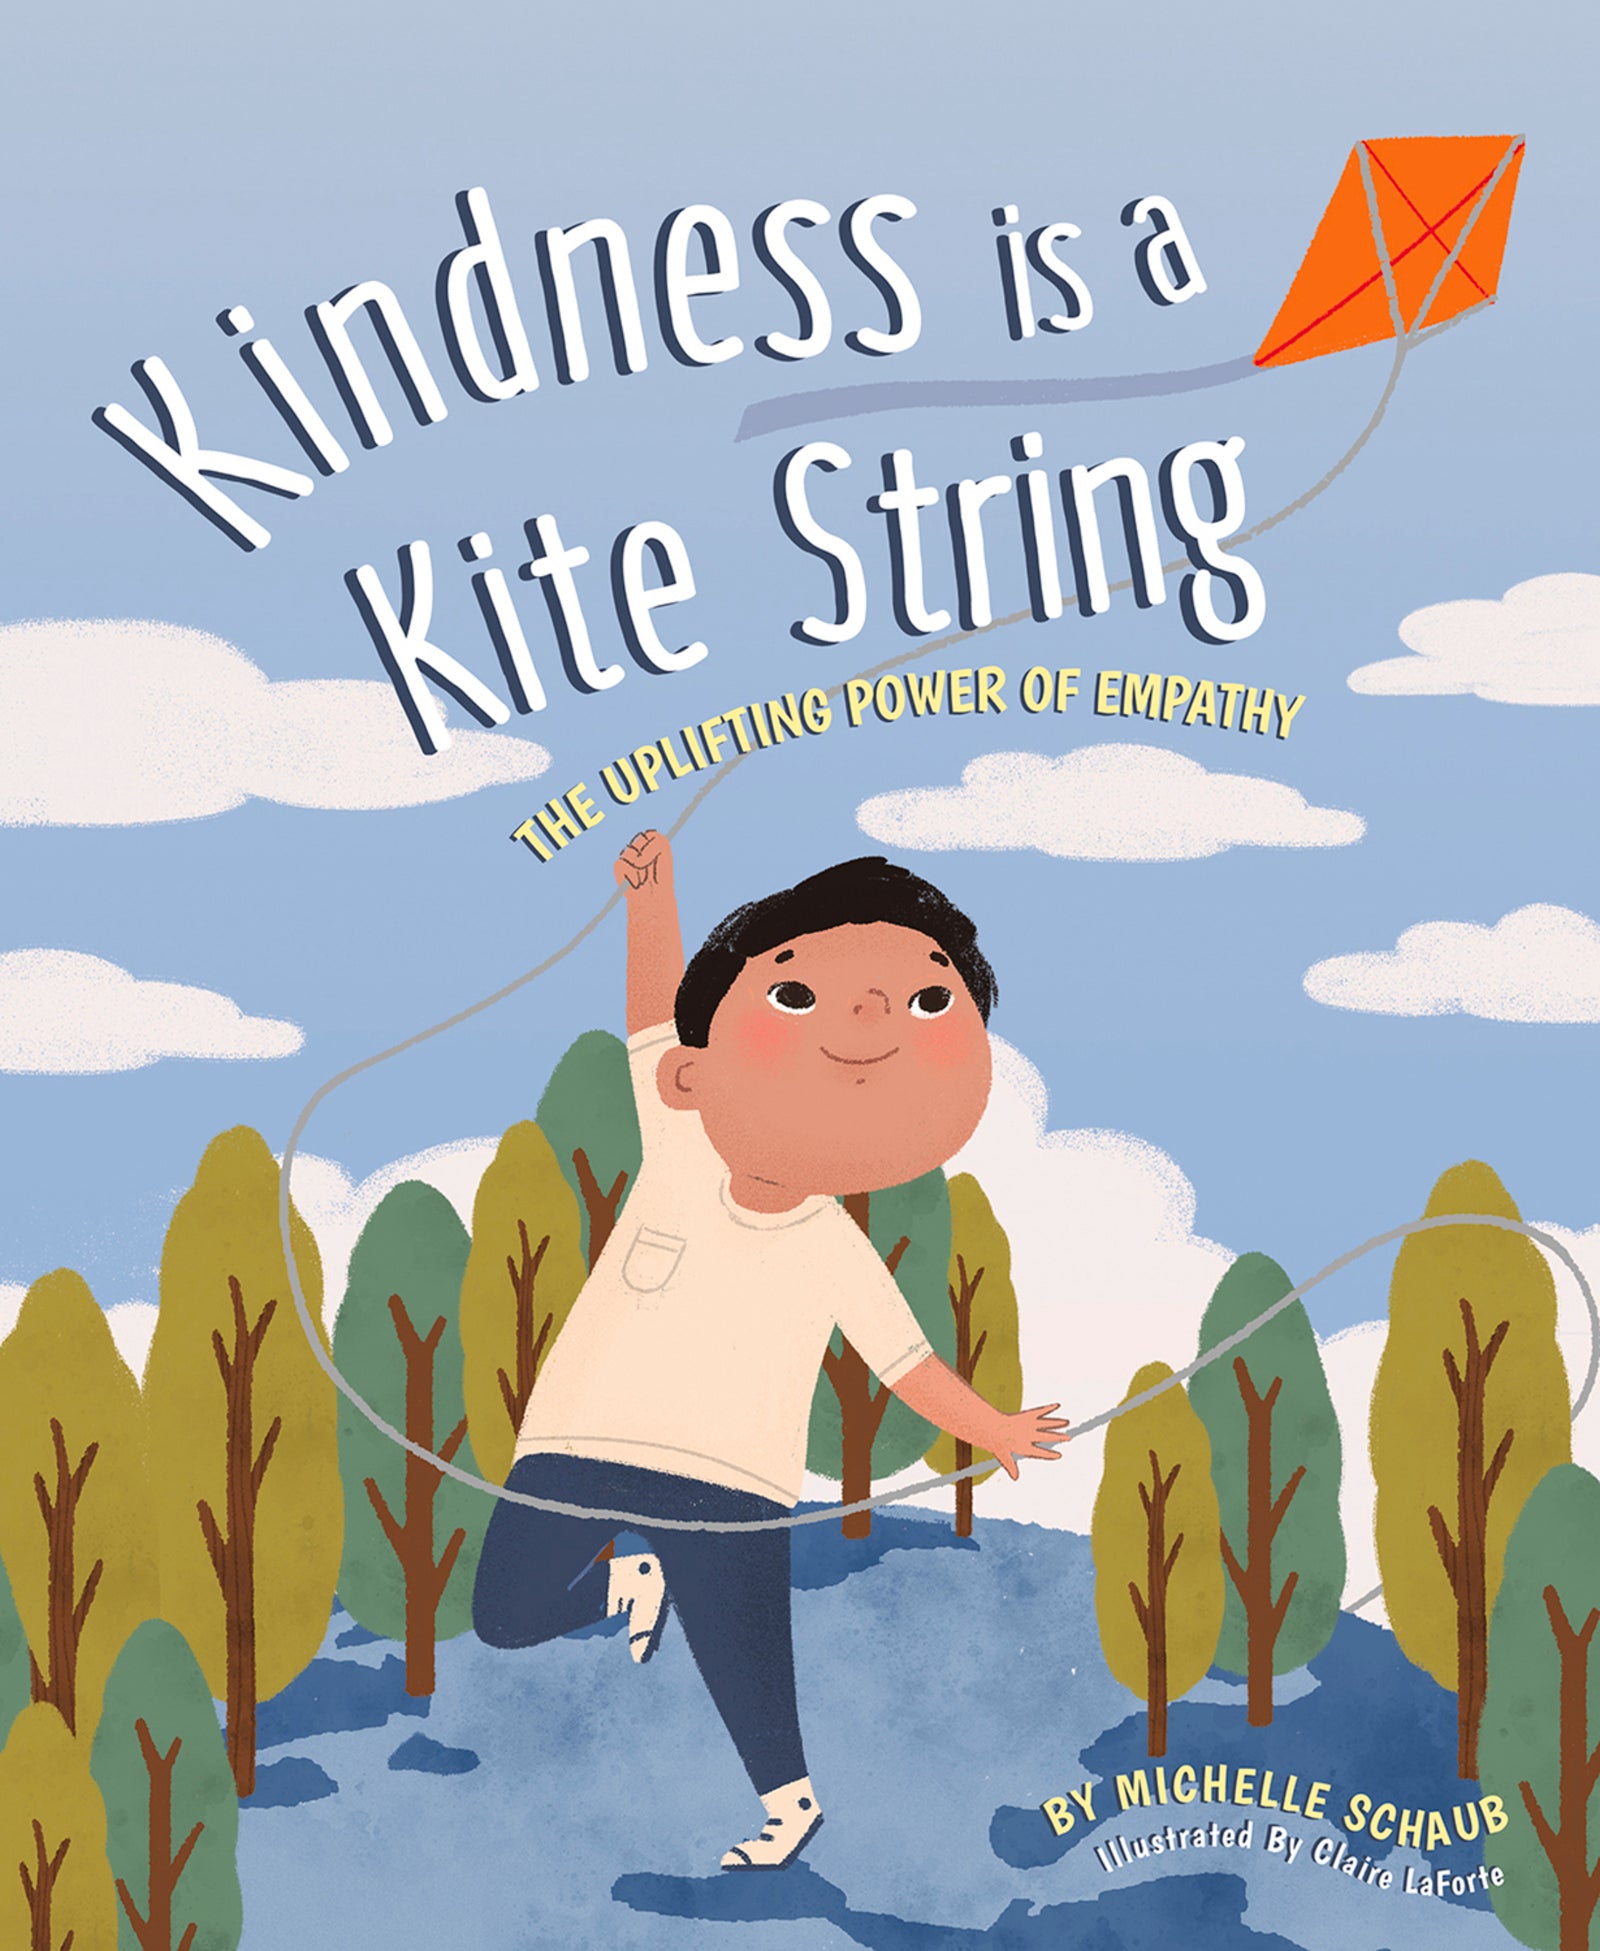 Order Kindness is a Kite String  Children's Book by Michelle Schaub –  Cardinal Rule Press